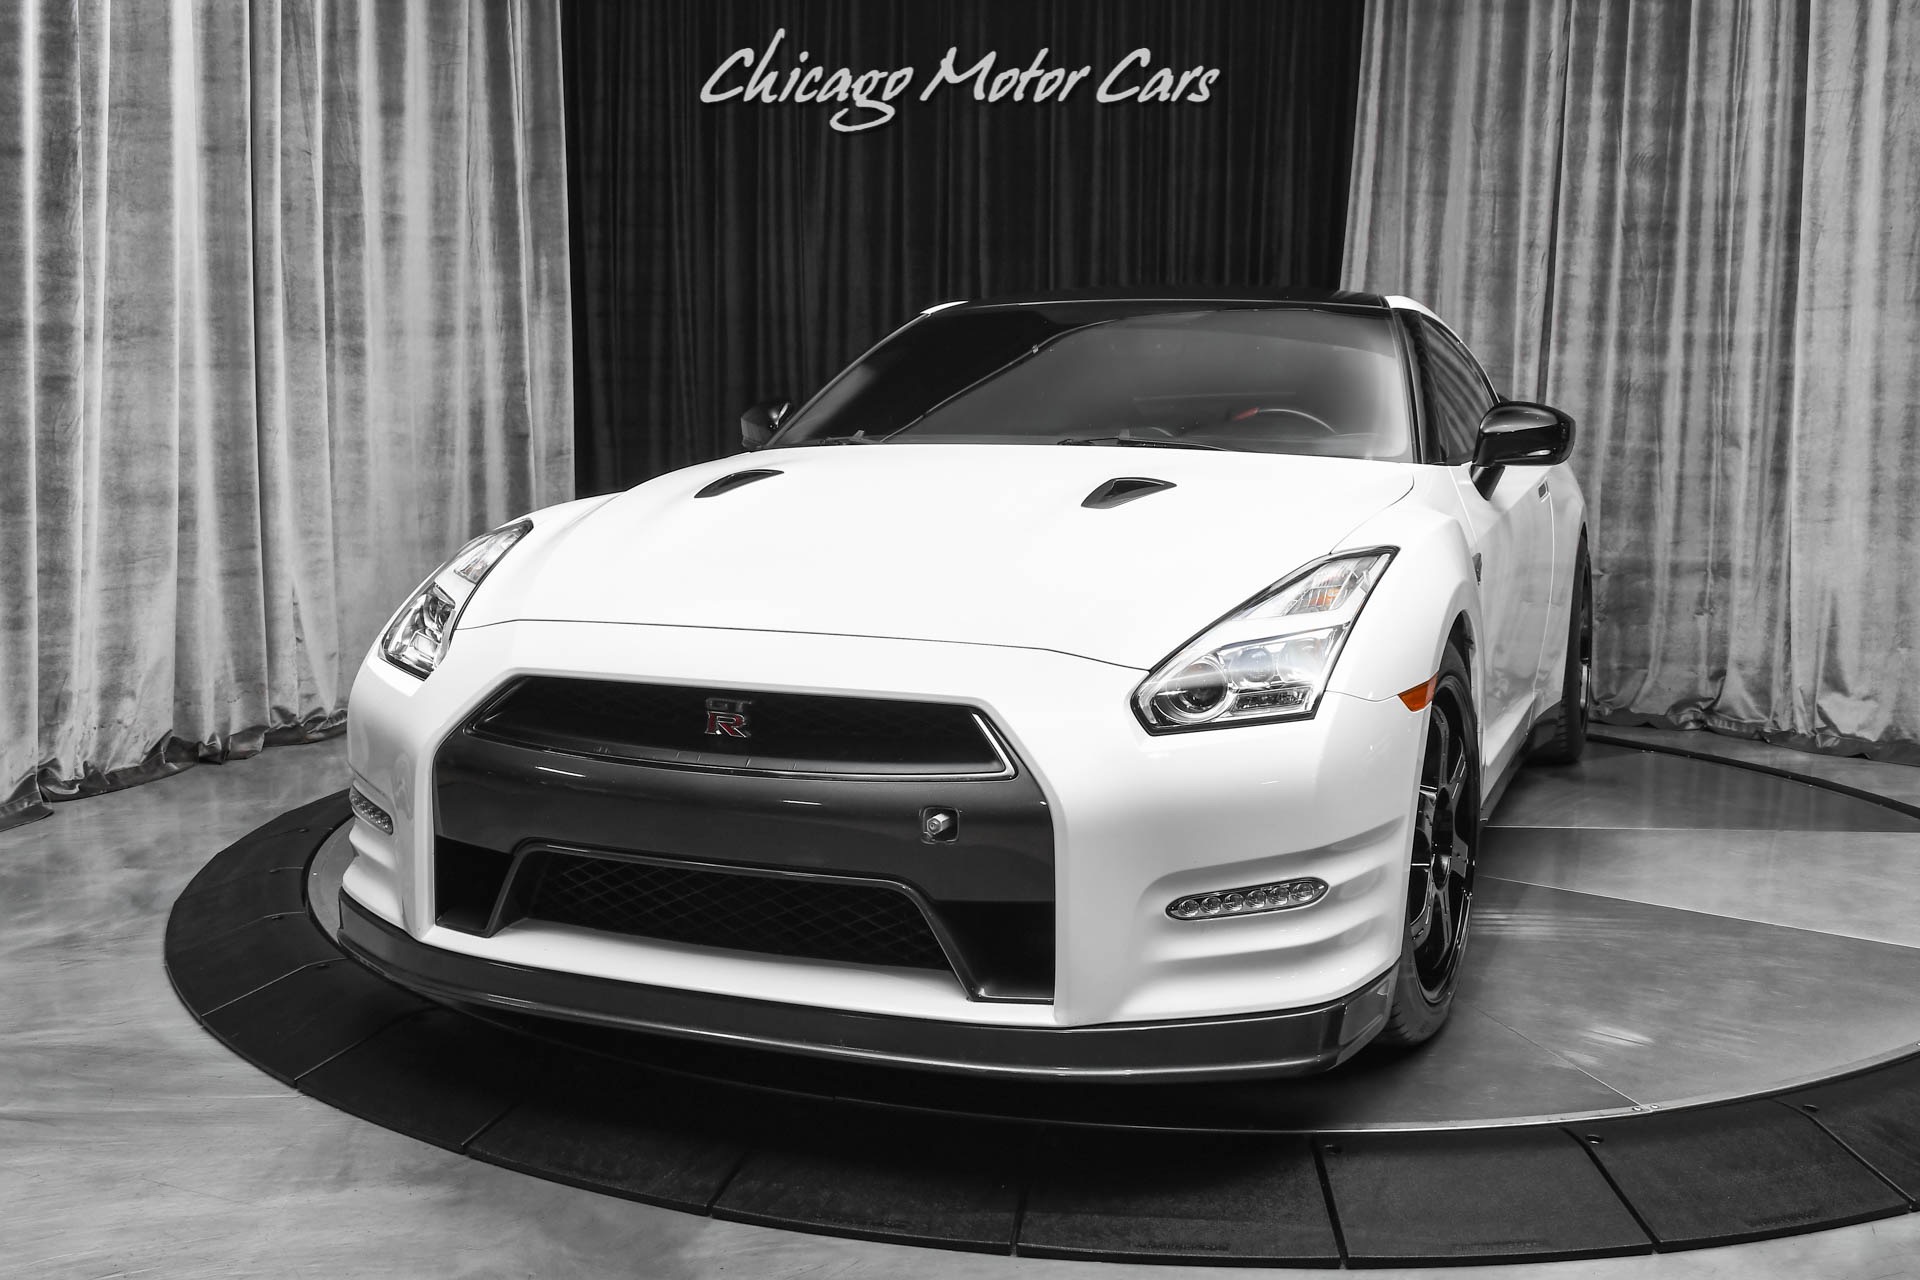 Used 2015 Nissan GT-R Black Edition Coupe FBO FLEX FUEL! 612+ WHP! Super  Clean Build! For Sale (Special Pricing) | Chicago Motor Cars Stock #19071